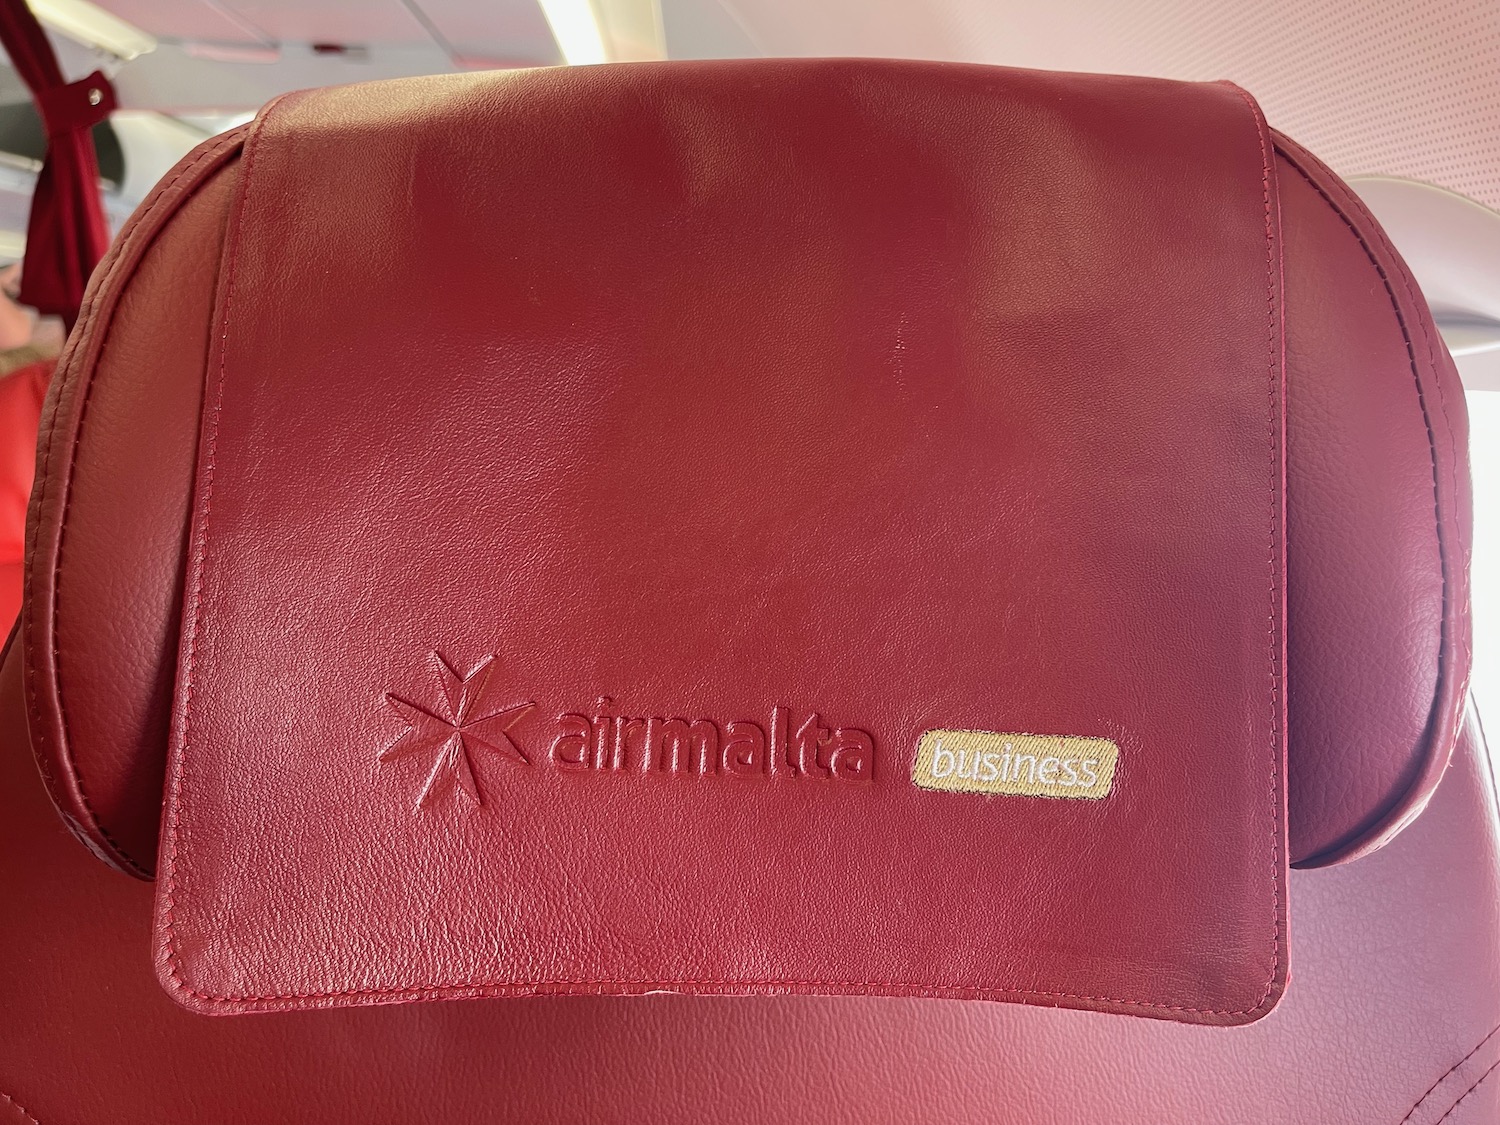 a red leather bag with a logo on it